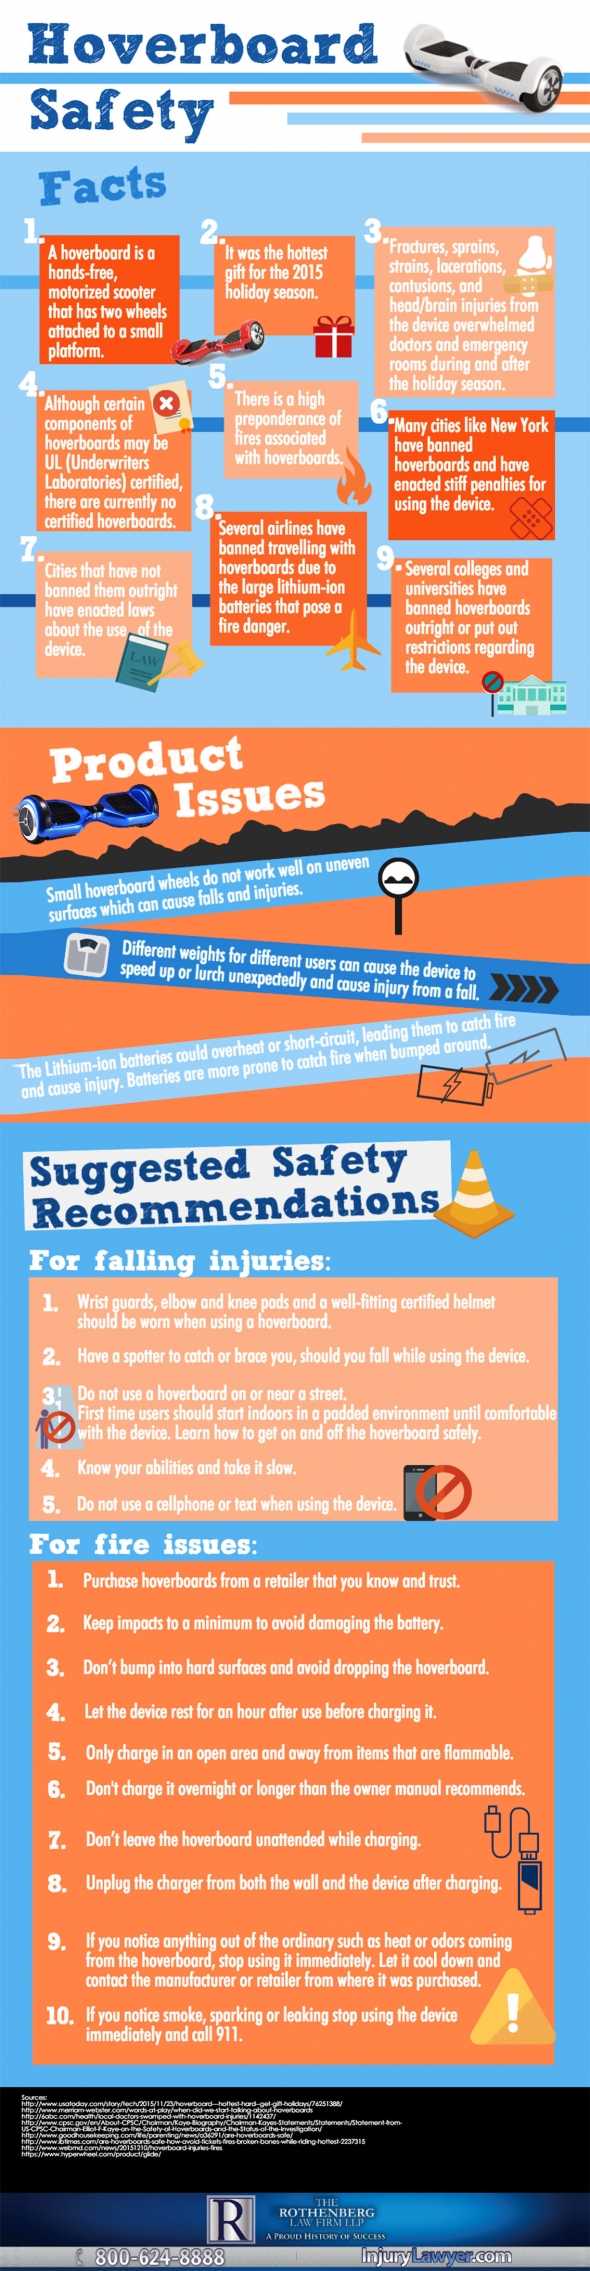 Hoverboard Safety Tips to Prevent Fire and Injuries [Infographic]